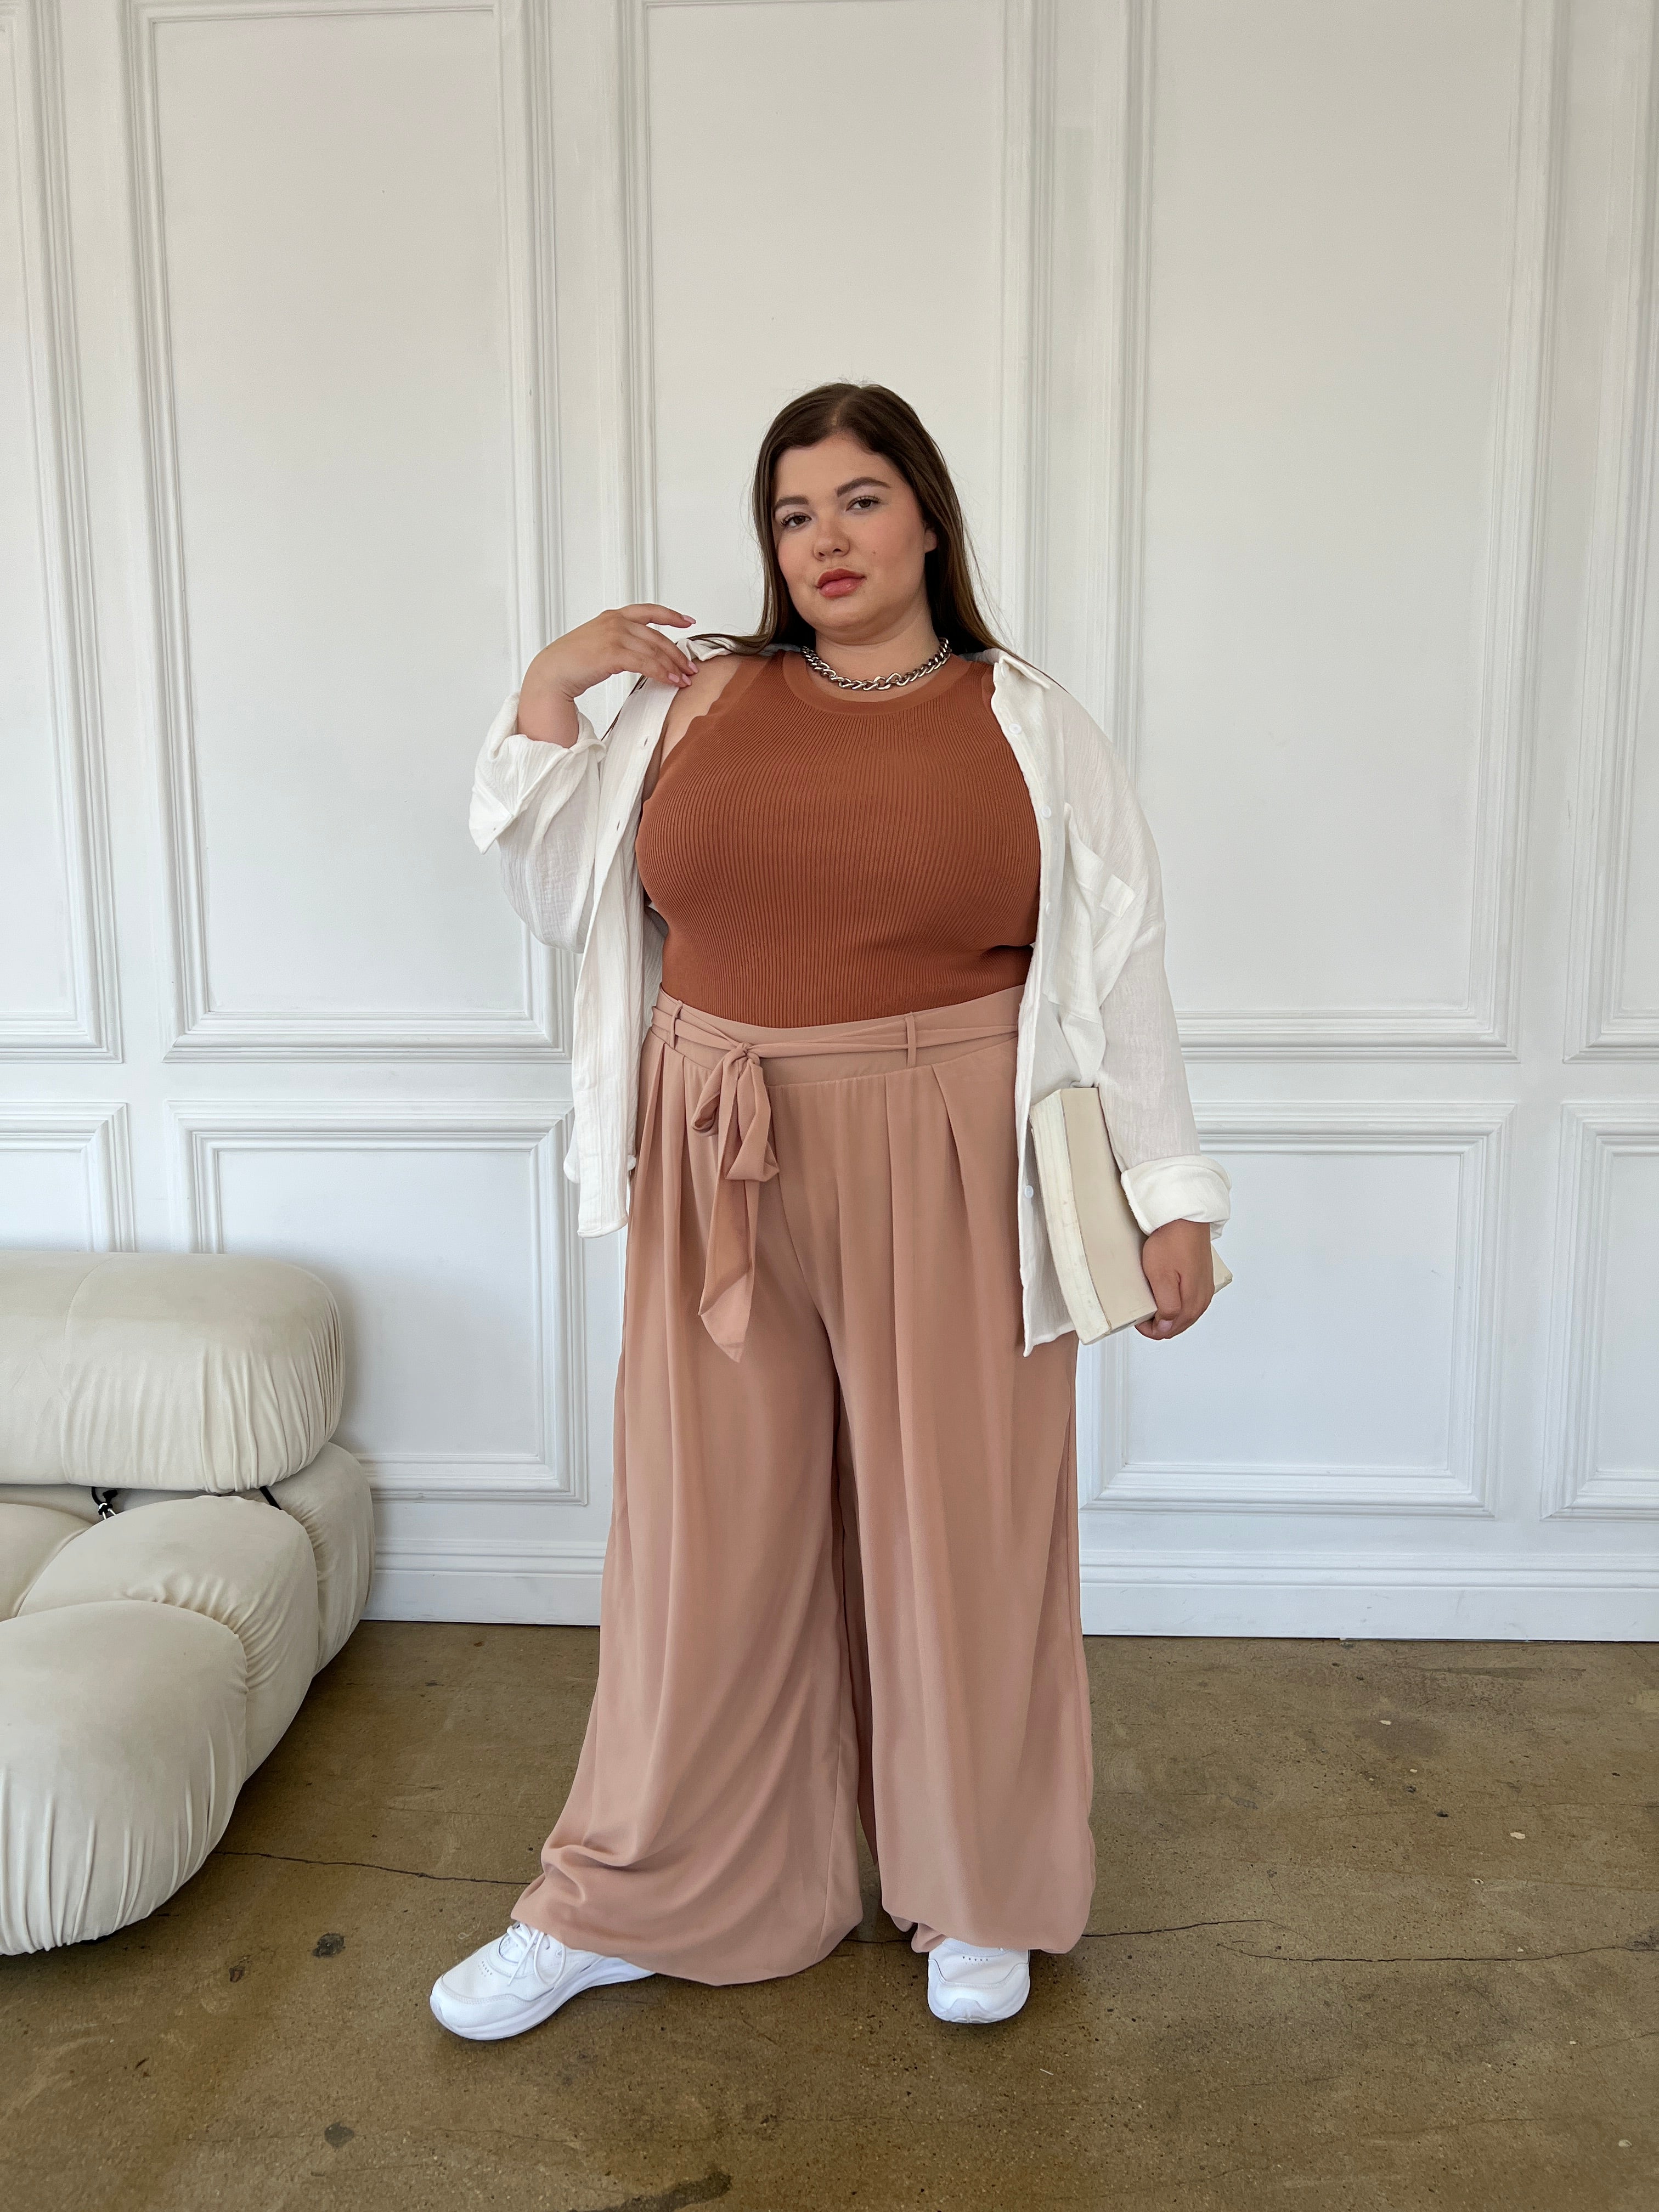 Wide Leg Palazzo Pants High Waisted Maxi Skirt Trousers, Plus Size -   Israel